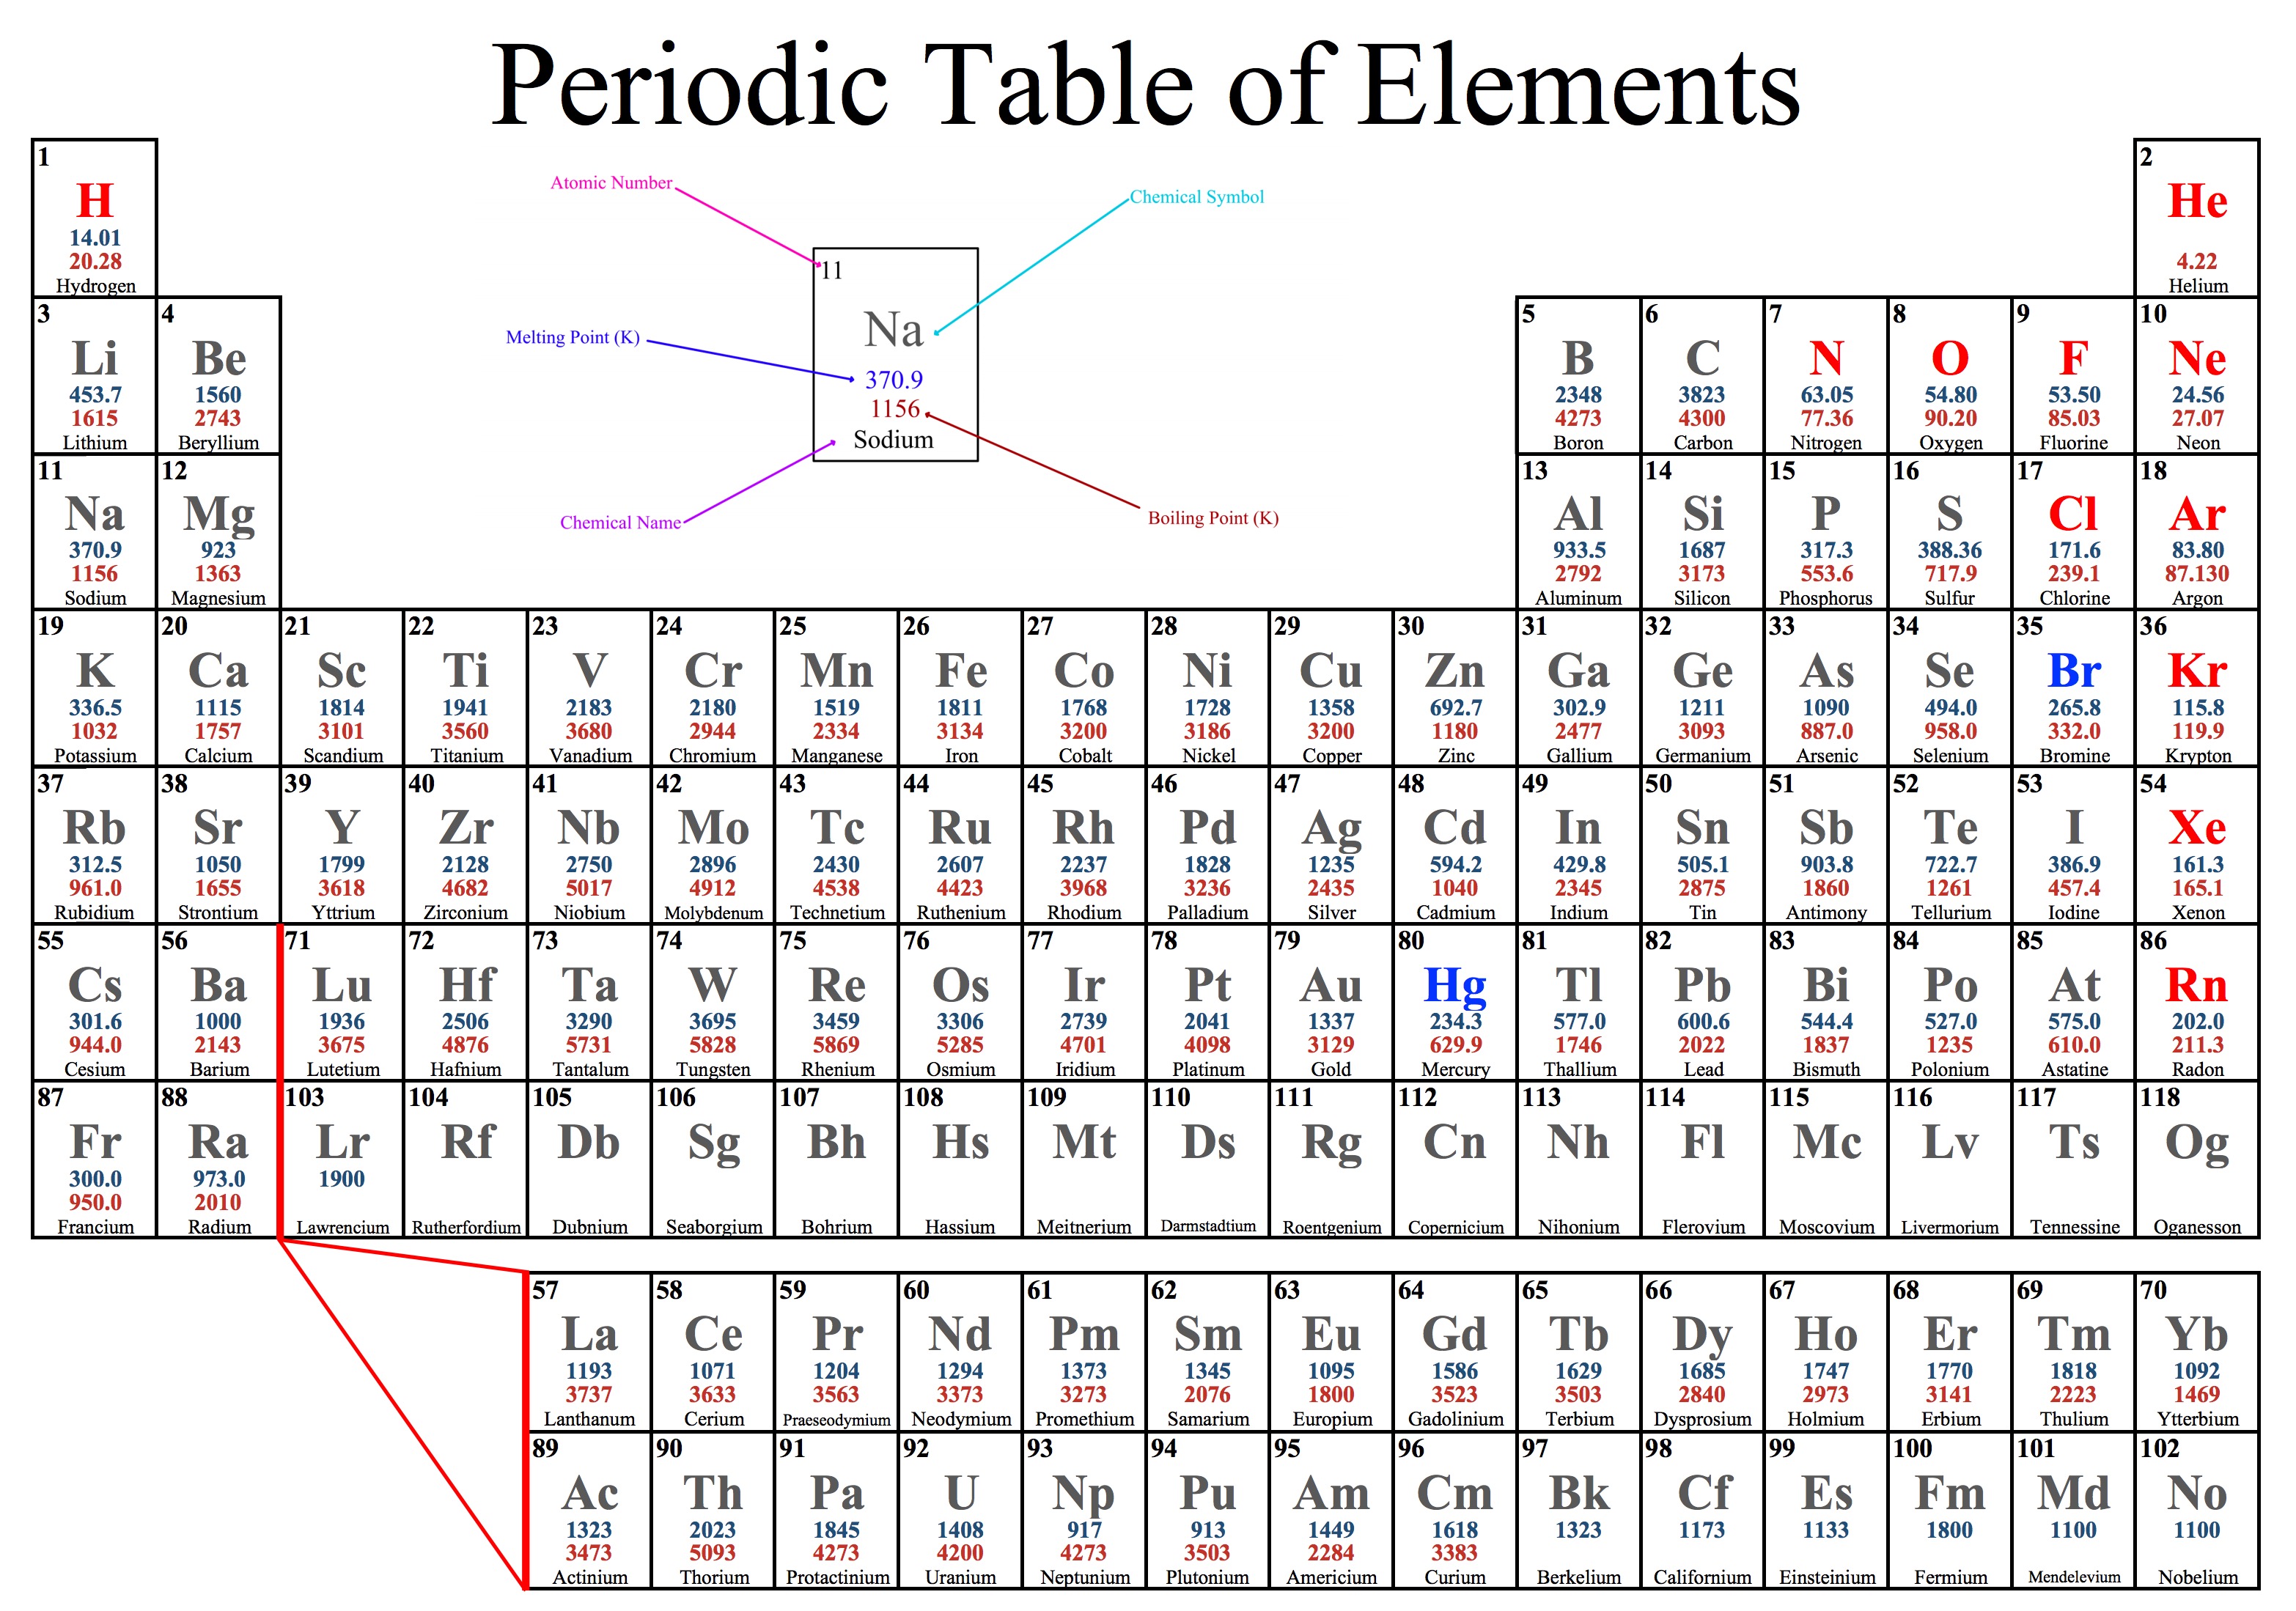 Periodic table table.